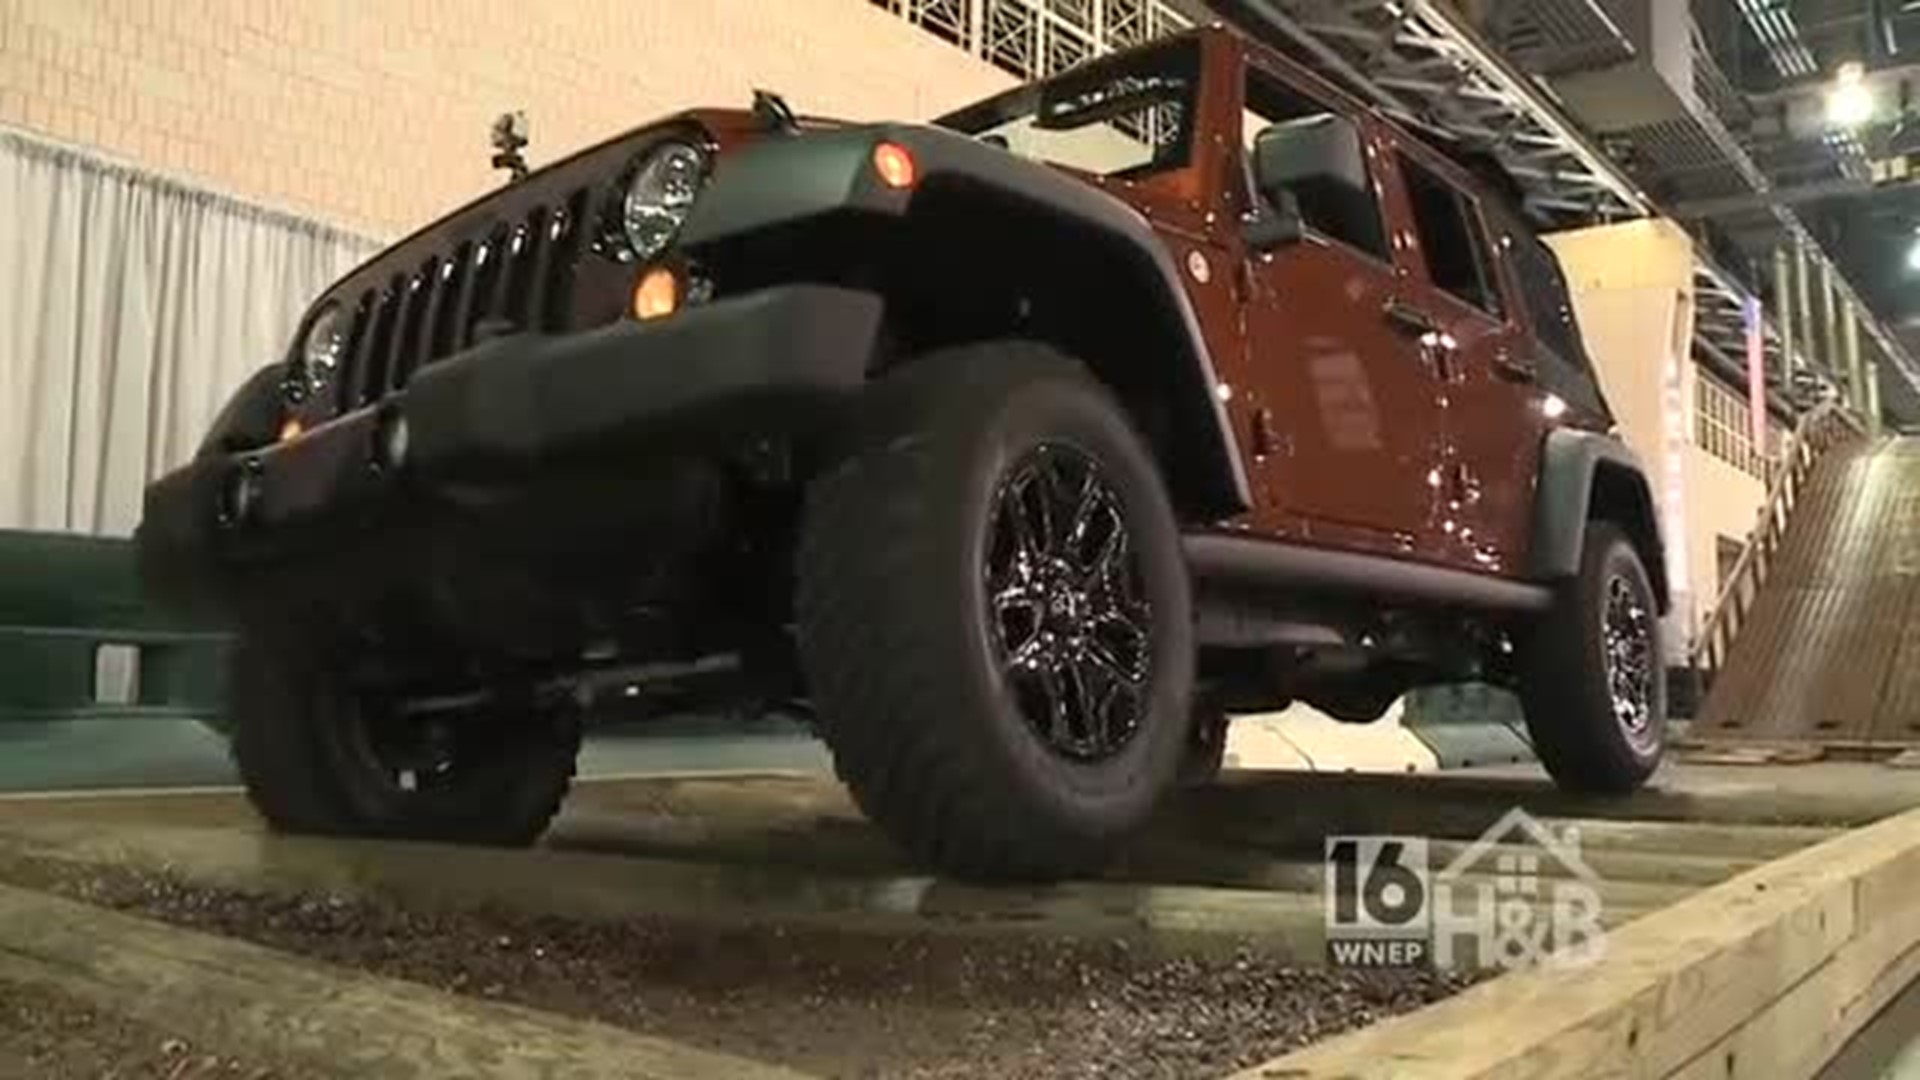 Toyota and Jeep Test Drives